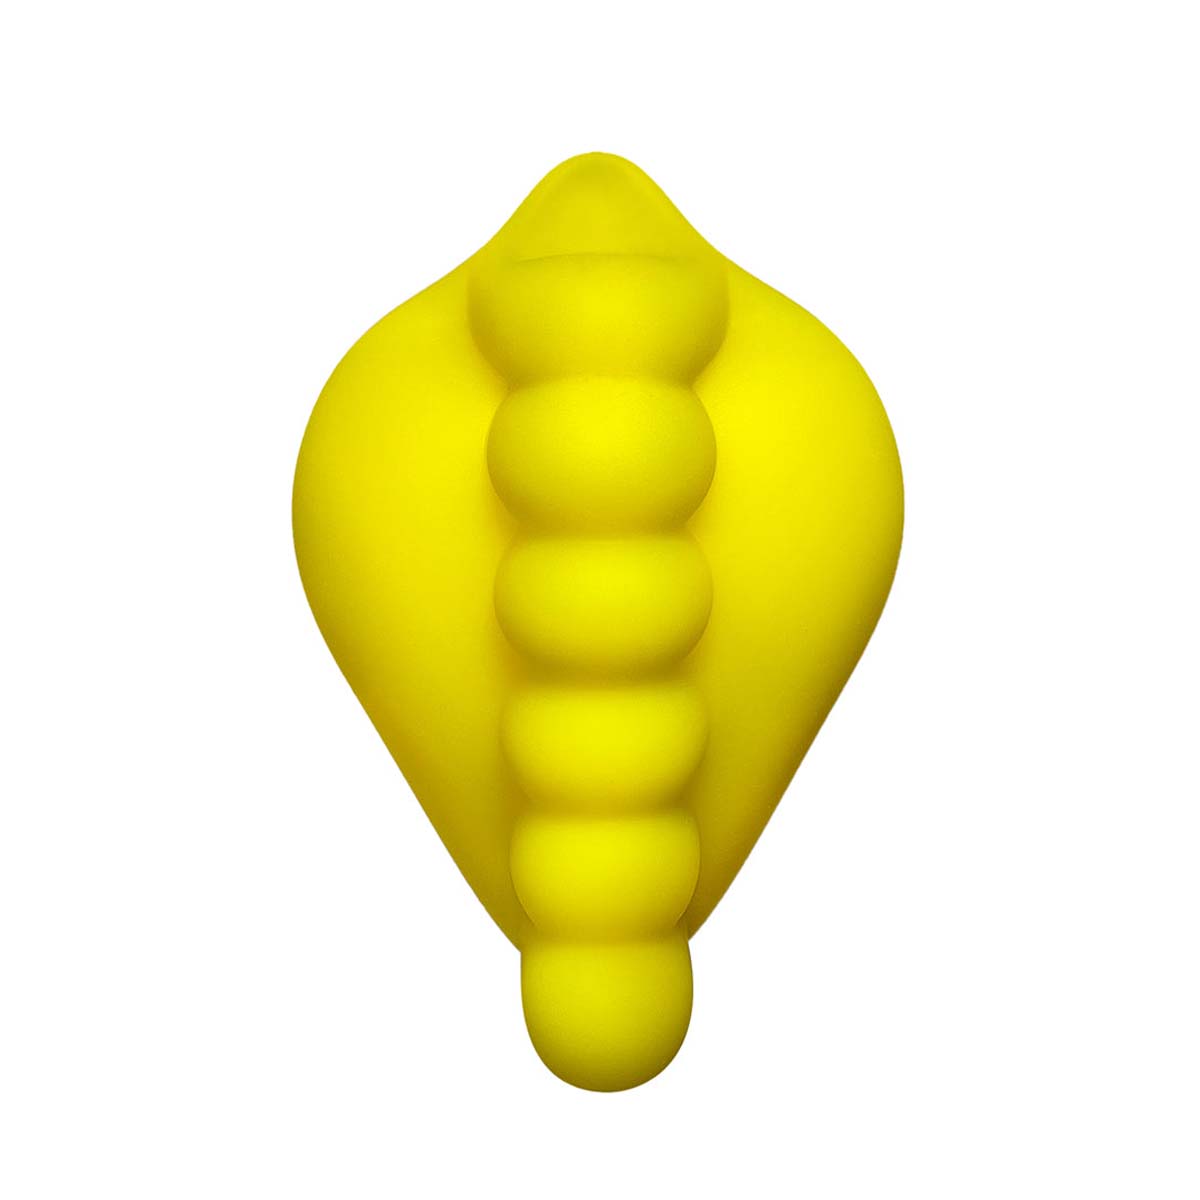 Yellow silicone stimulating cushion with bumps for dildo Nudie Co